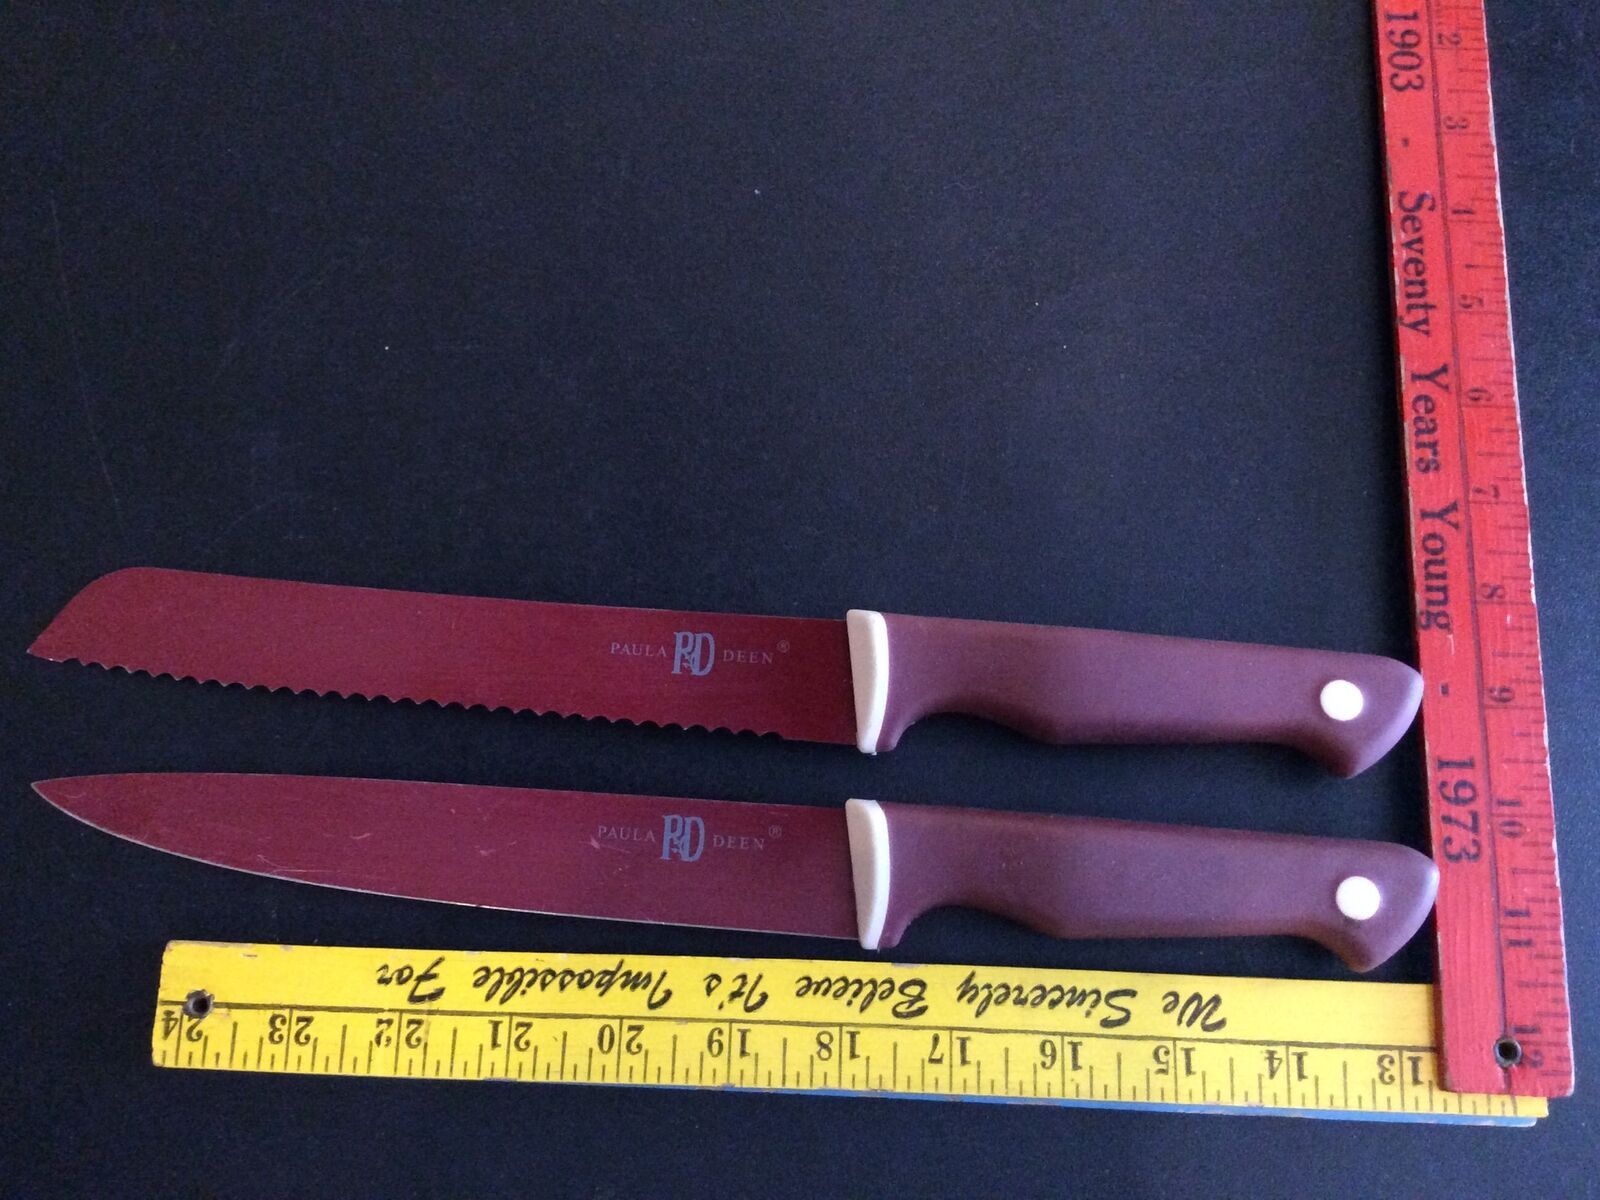  Paula Deen Red Handle Kitchen Knives Lot Of 2 Bre 